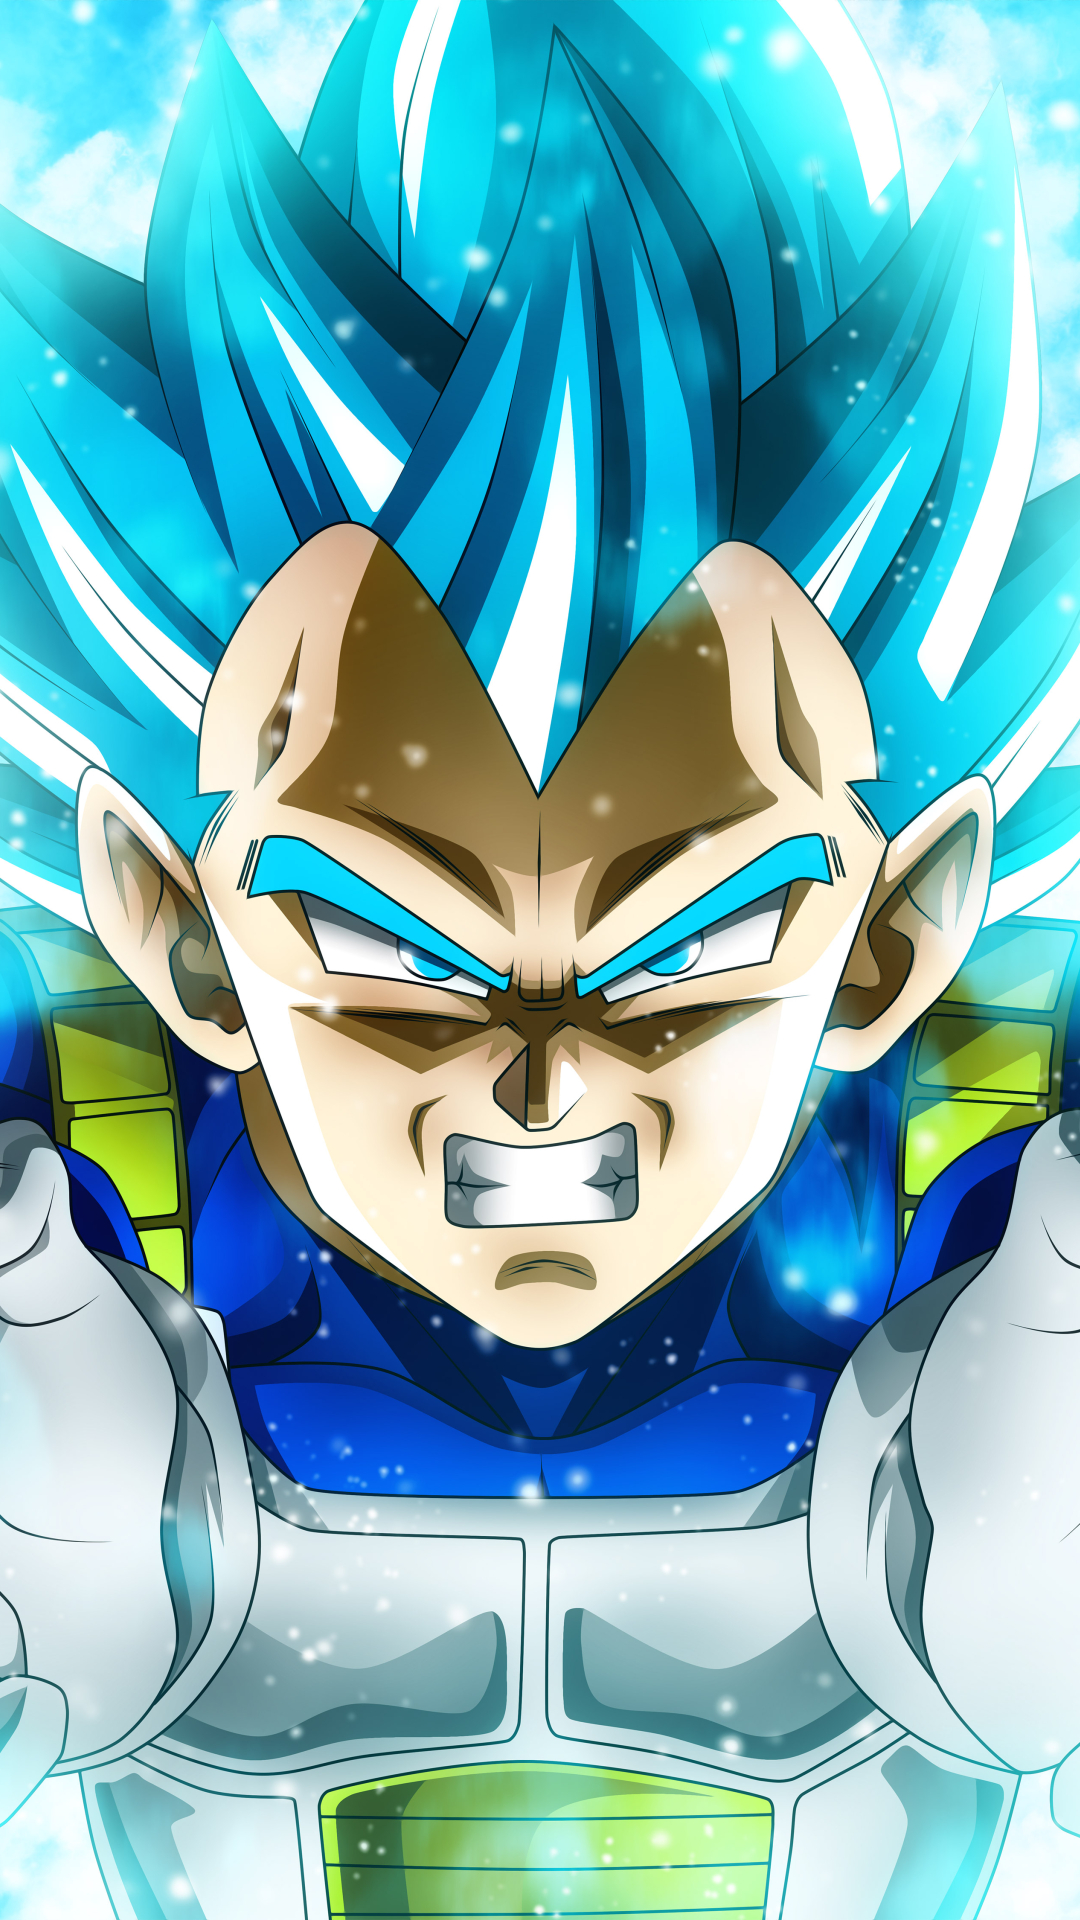 1080x1920 Resolution Dragon Ball Super Iphone 7, 6s, 6 Plus and Pixel ...